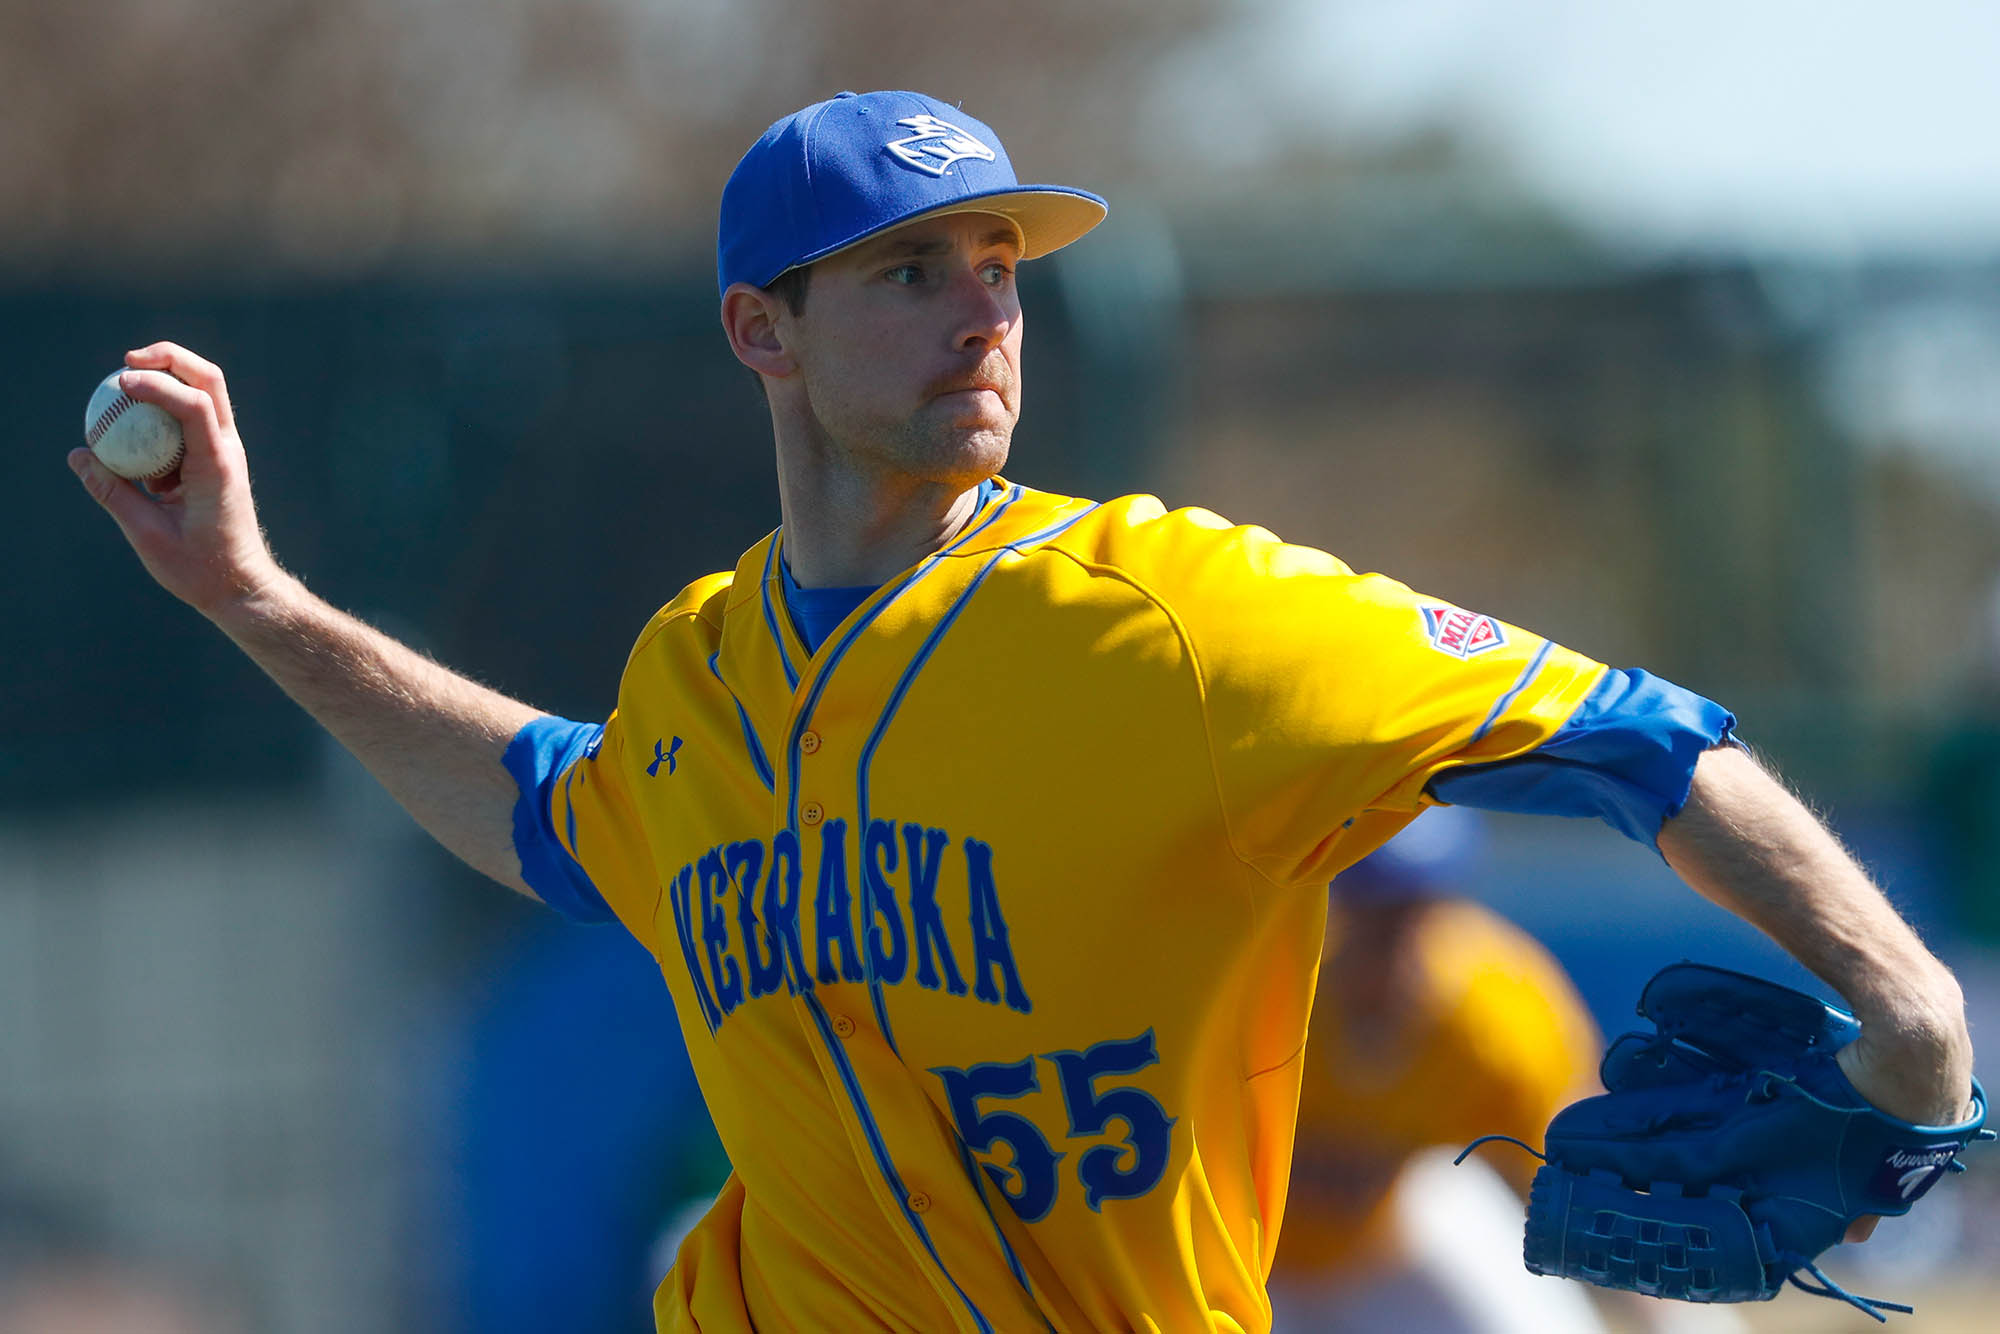 Andrew Riddell pitched for UNK in 2016 and 2018, making 19 appearances and 10 starts. (Photo by Corbey R. Dorsey, UNK Communications)